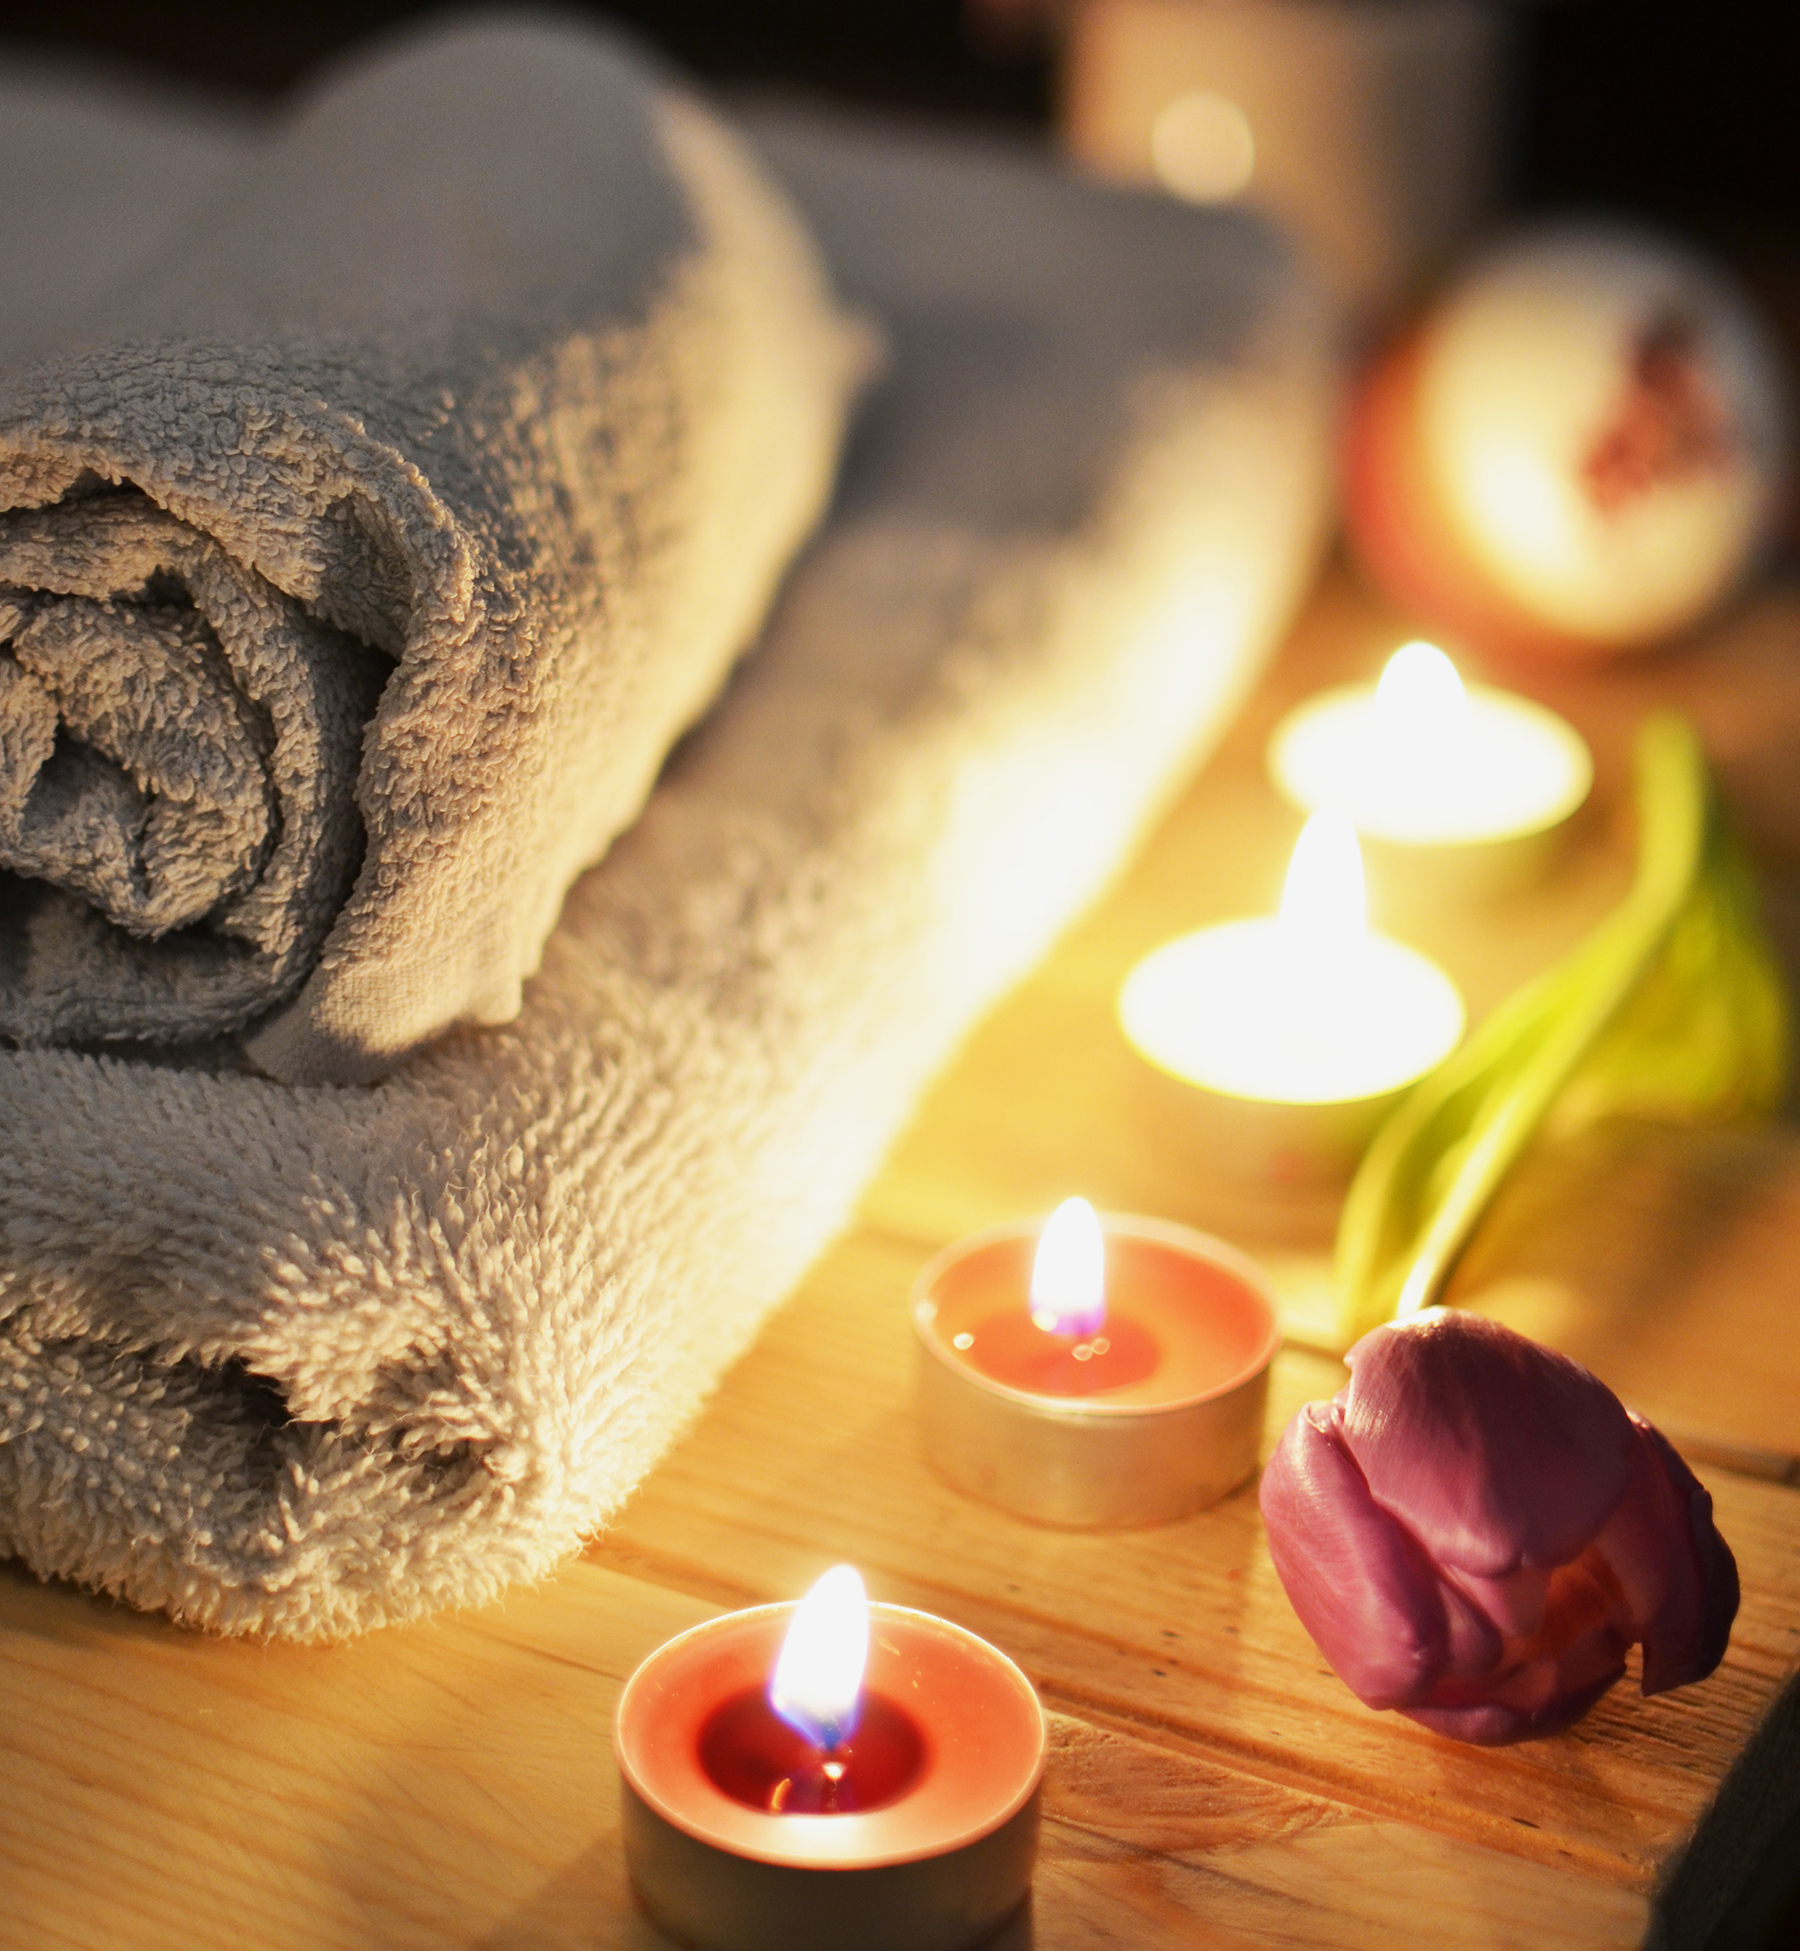 8 Tips For Taking the Most Relaxing Bath